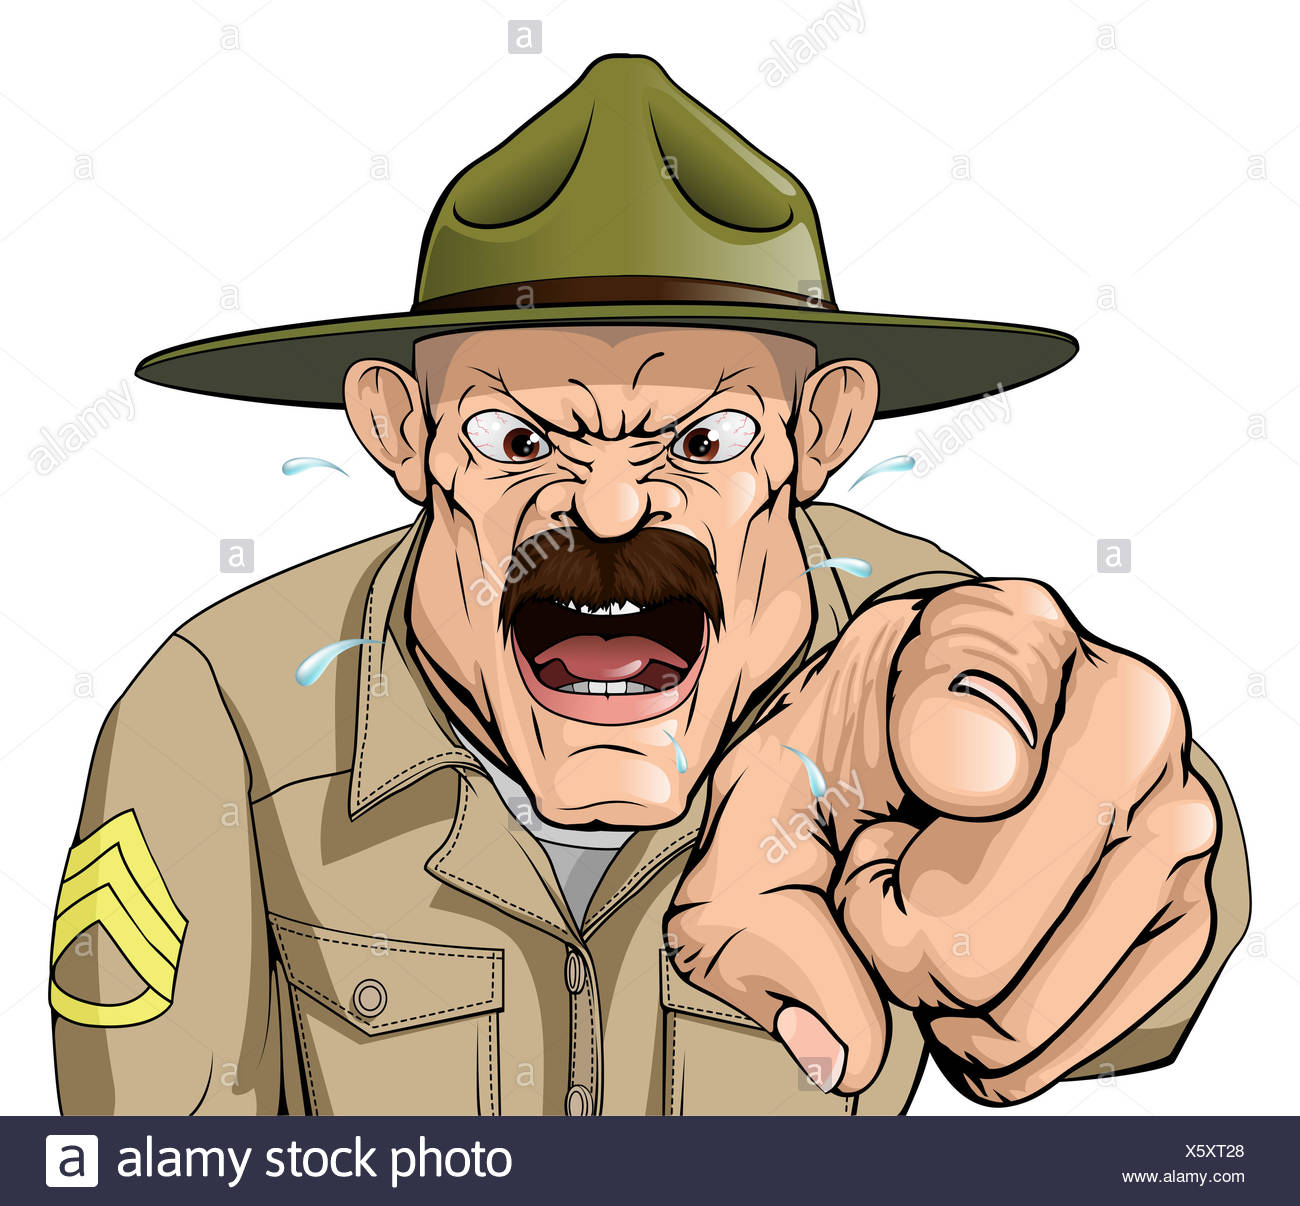 Drill Sergeant Yelling High Resolution Stock Photography and Images - Alamy